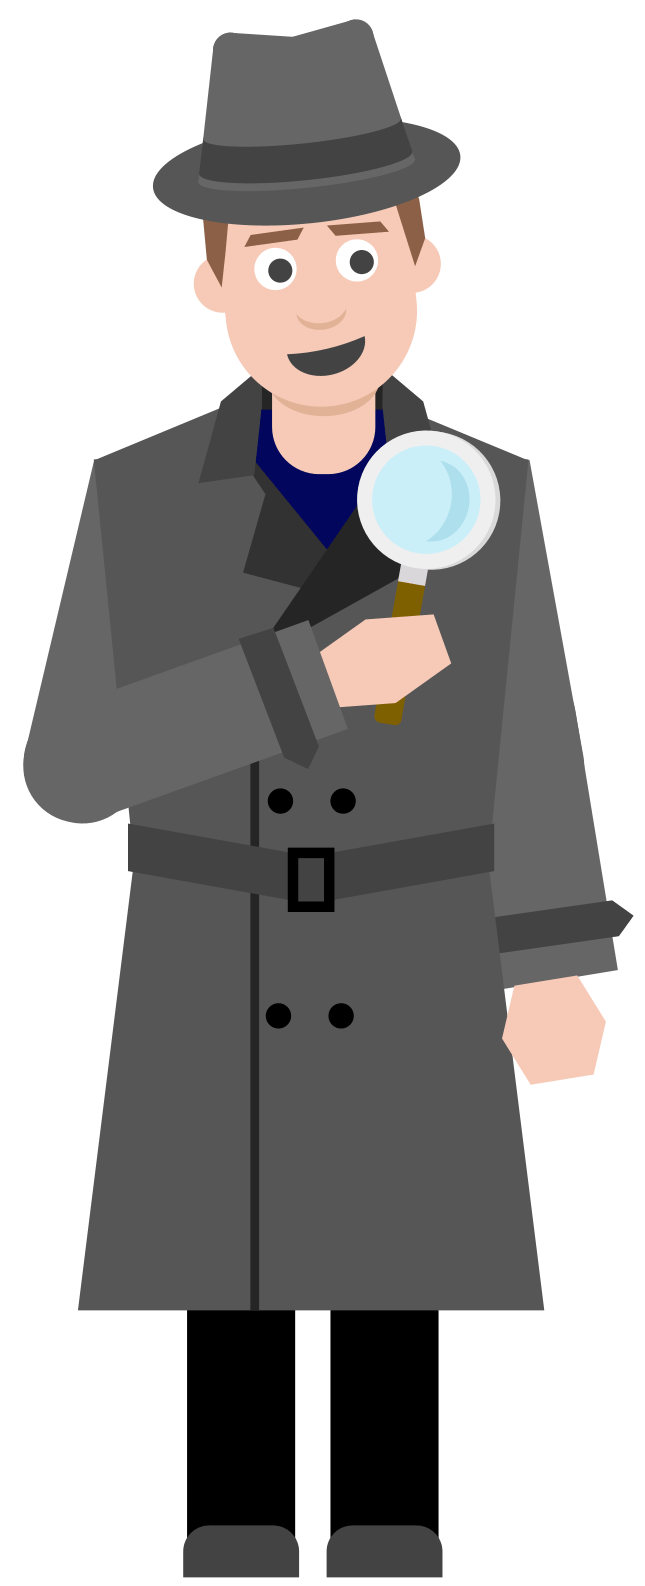 Drawing of Tony dressed as a secret agent holding a magnifying glass